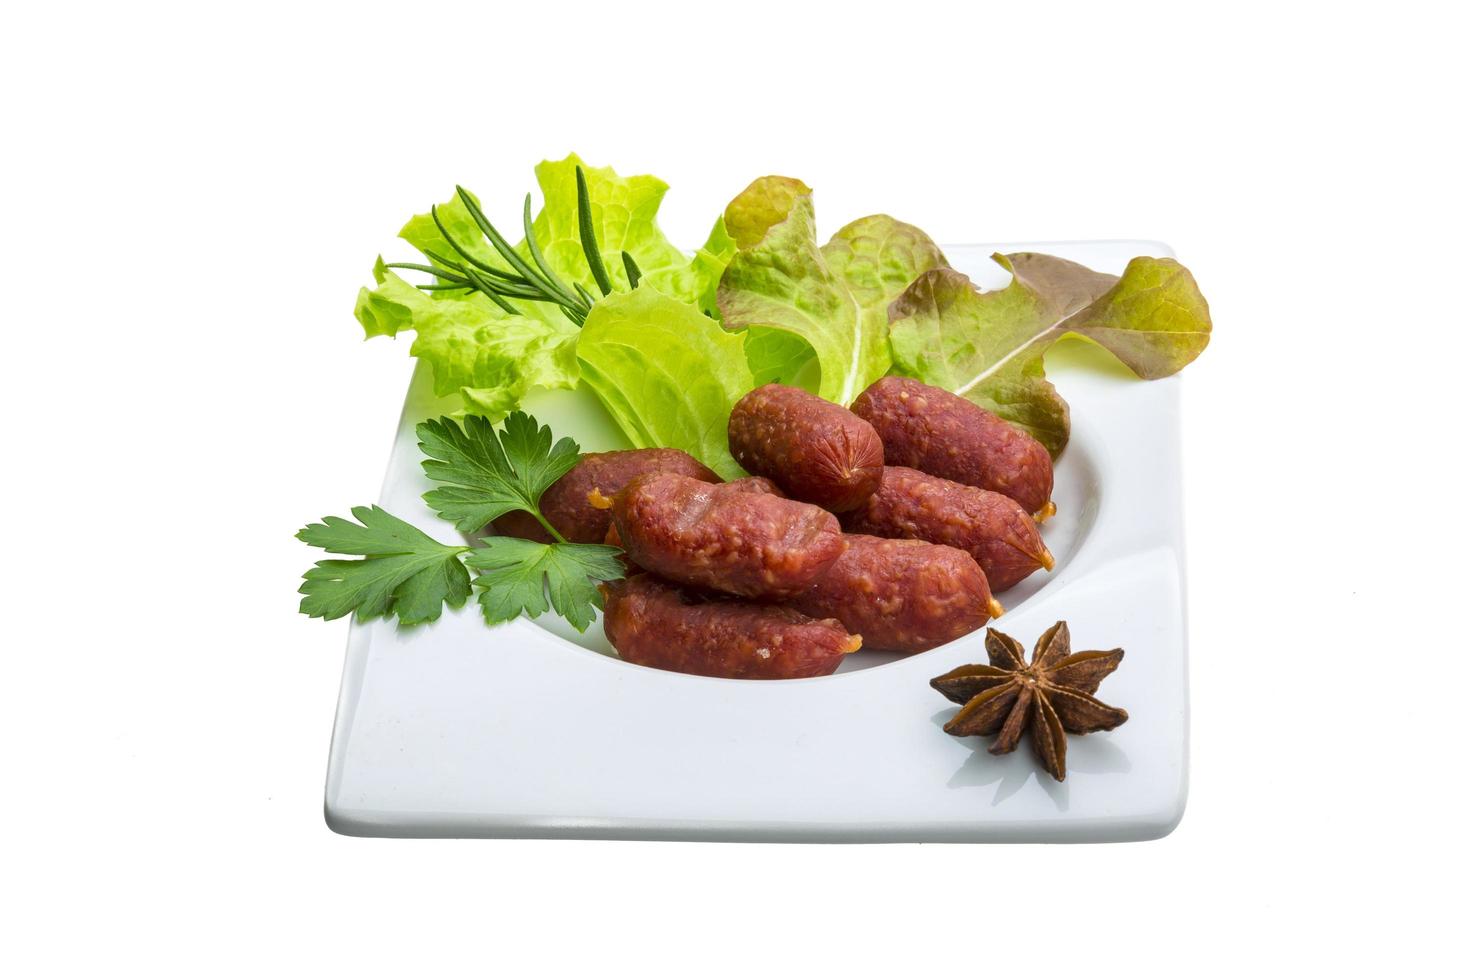 Salami sausages in a bowl on white background photo